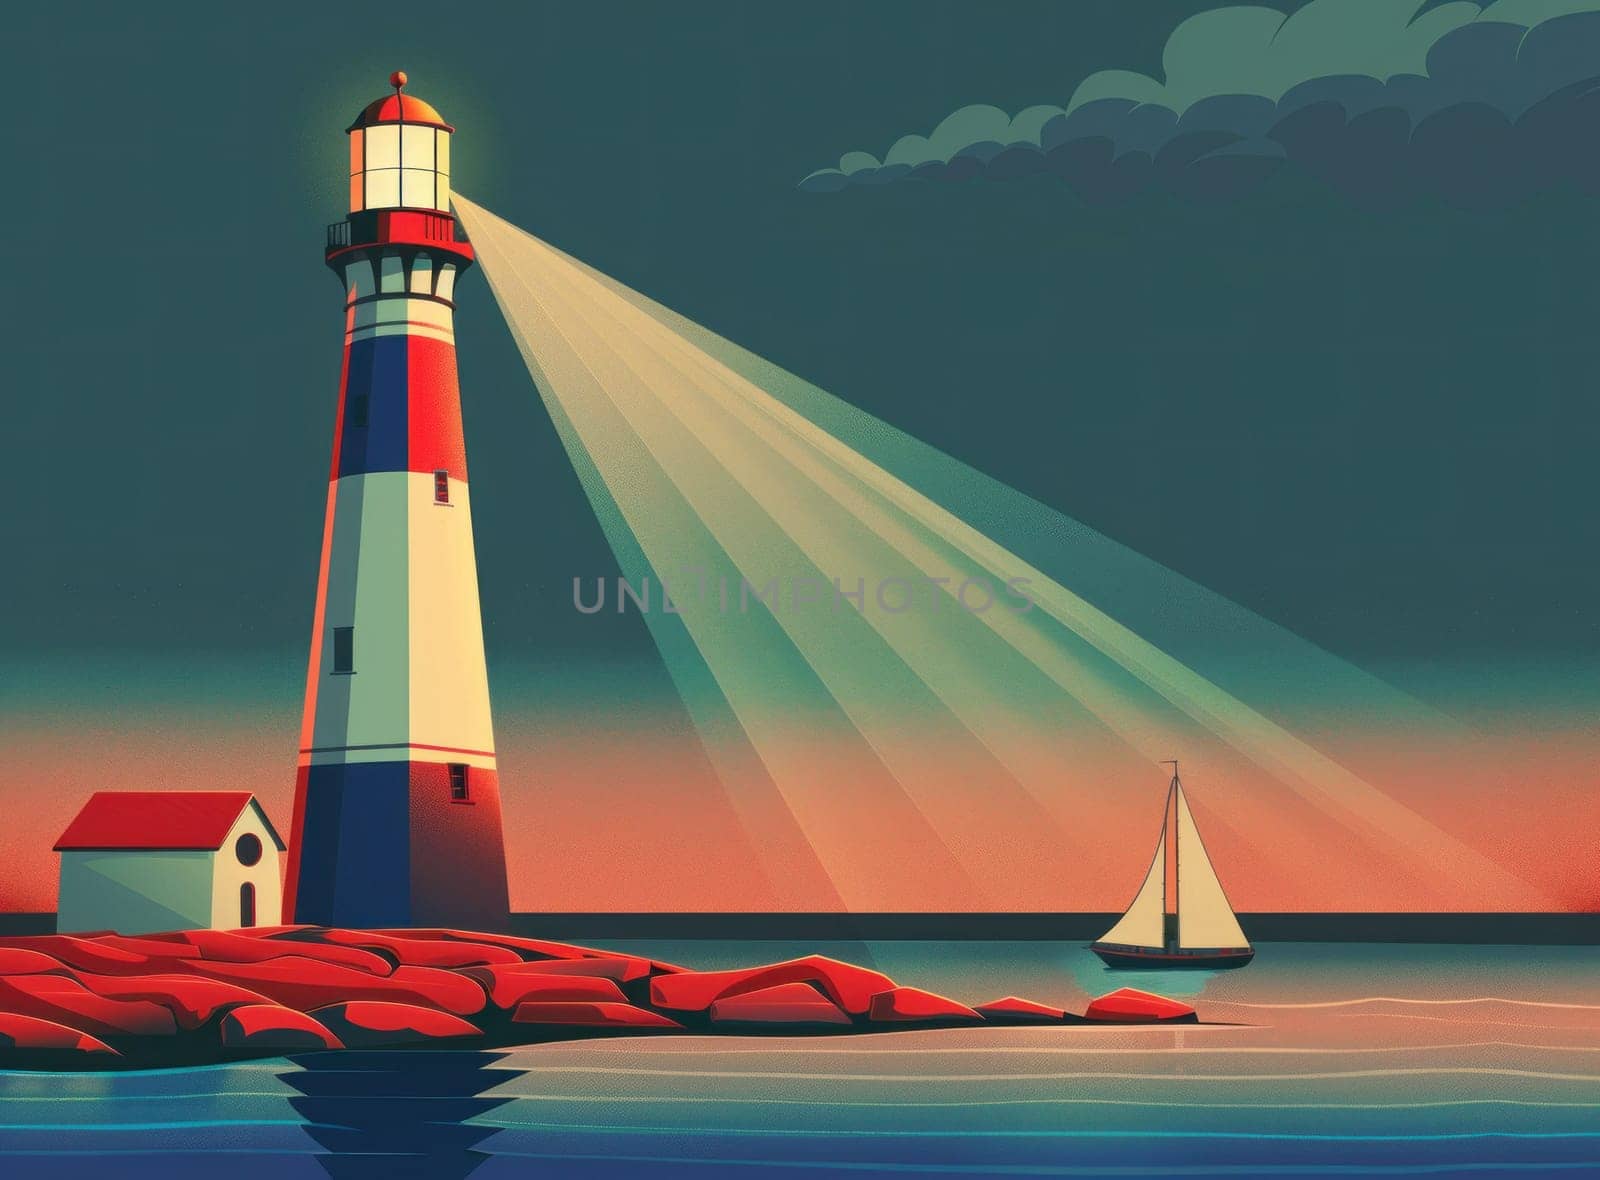 Scenic sunset view of lighthouse with sailboats in distance on ocean travel adventure landscape illustration